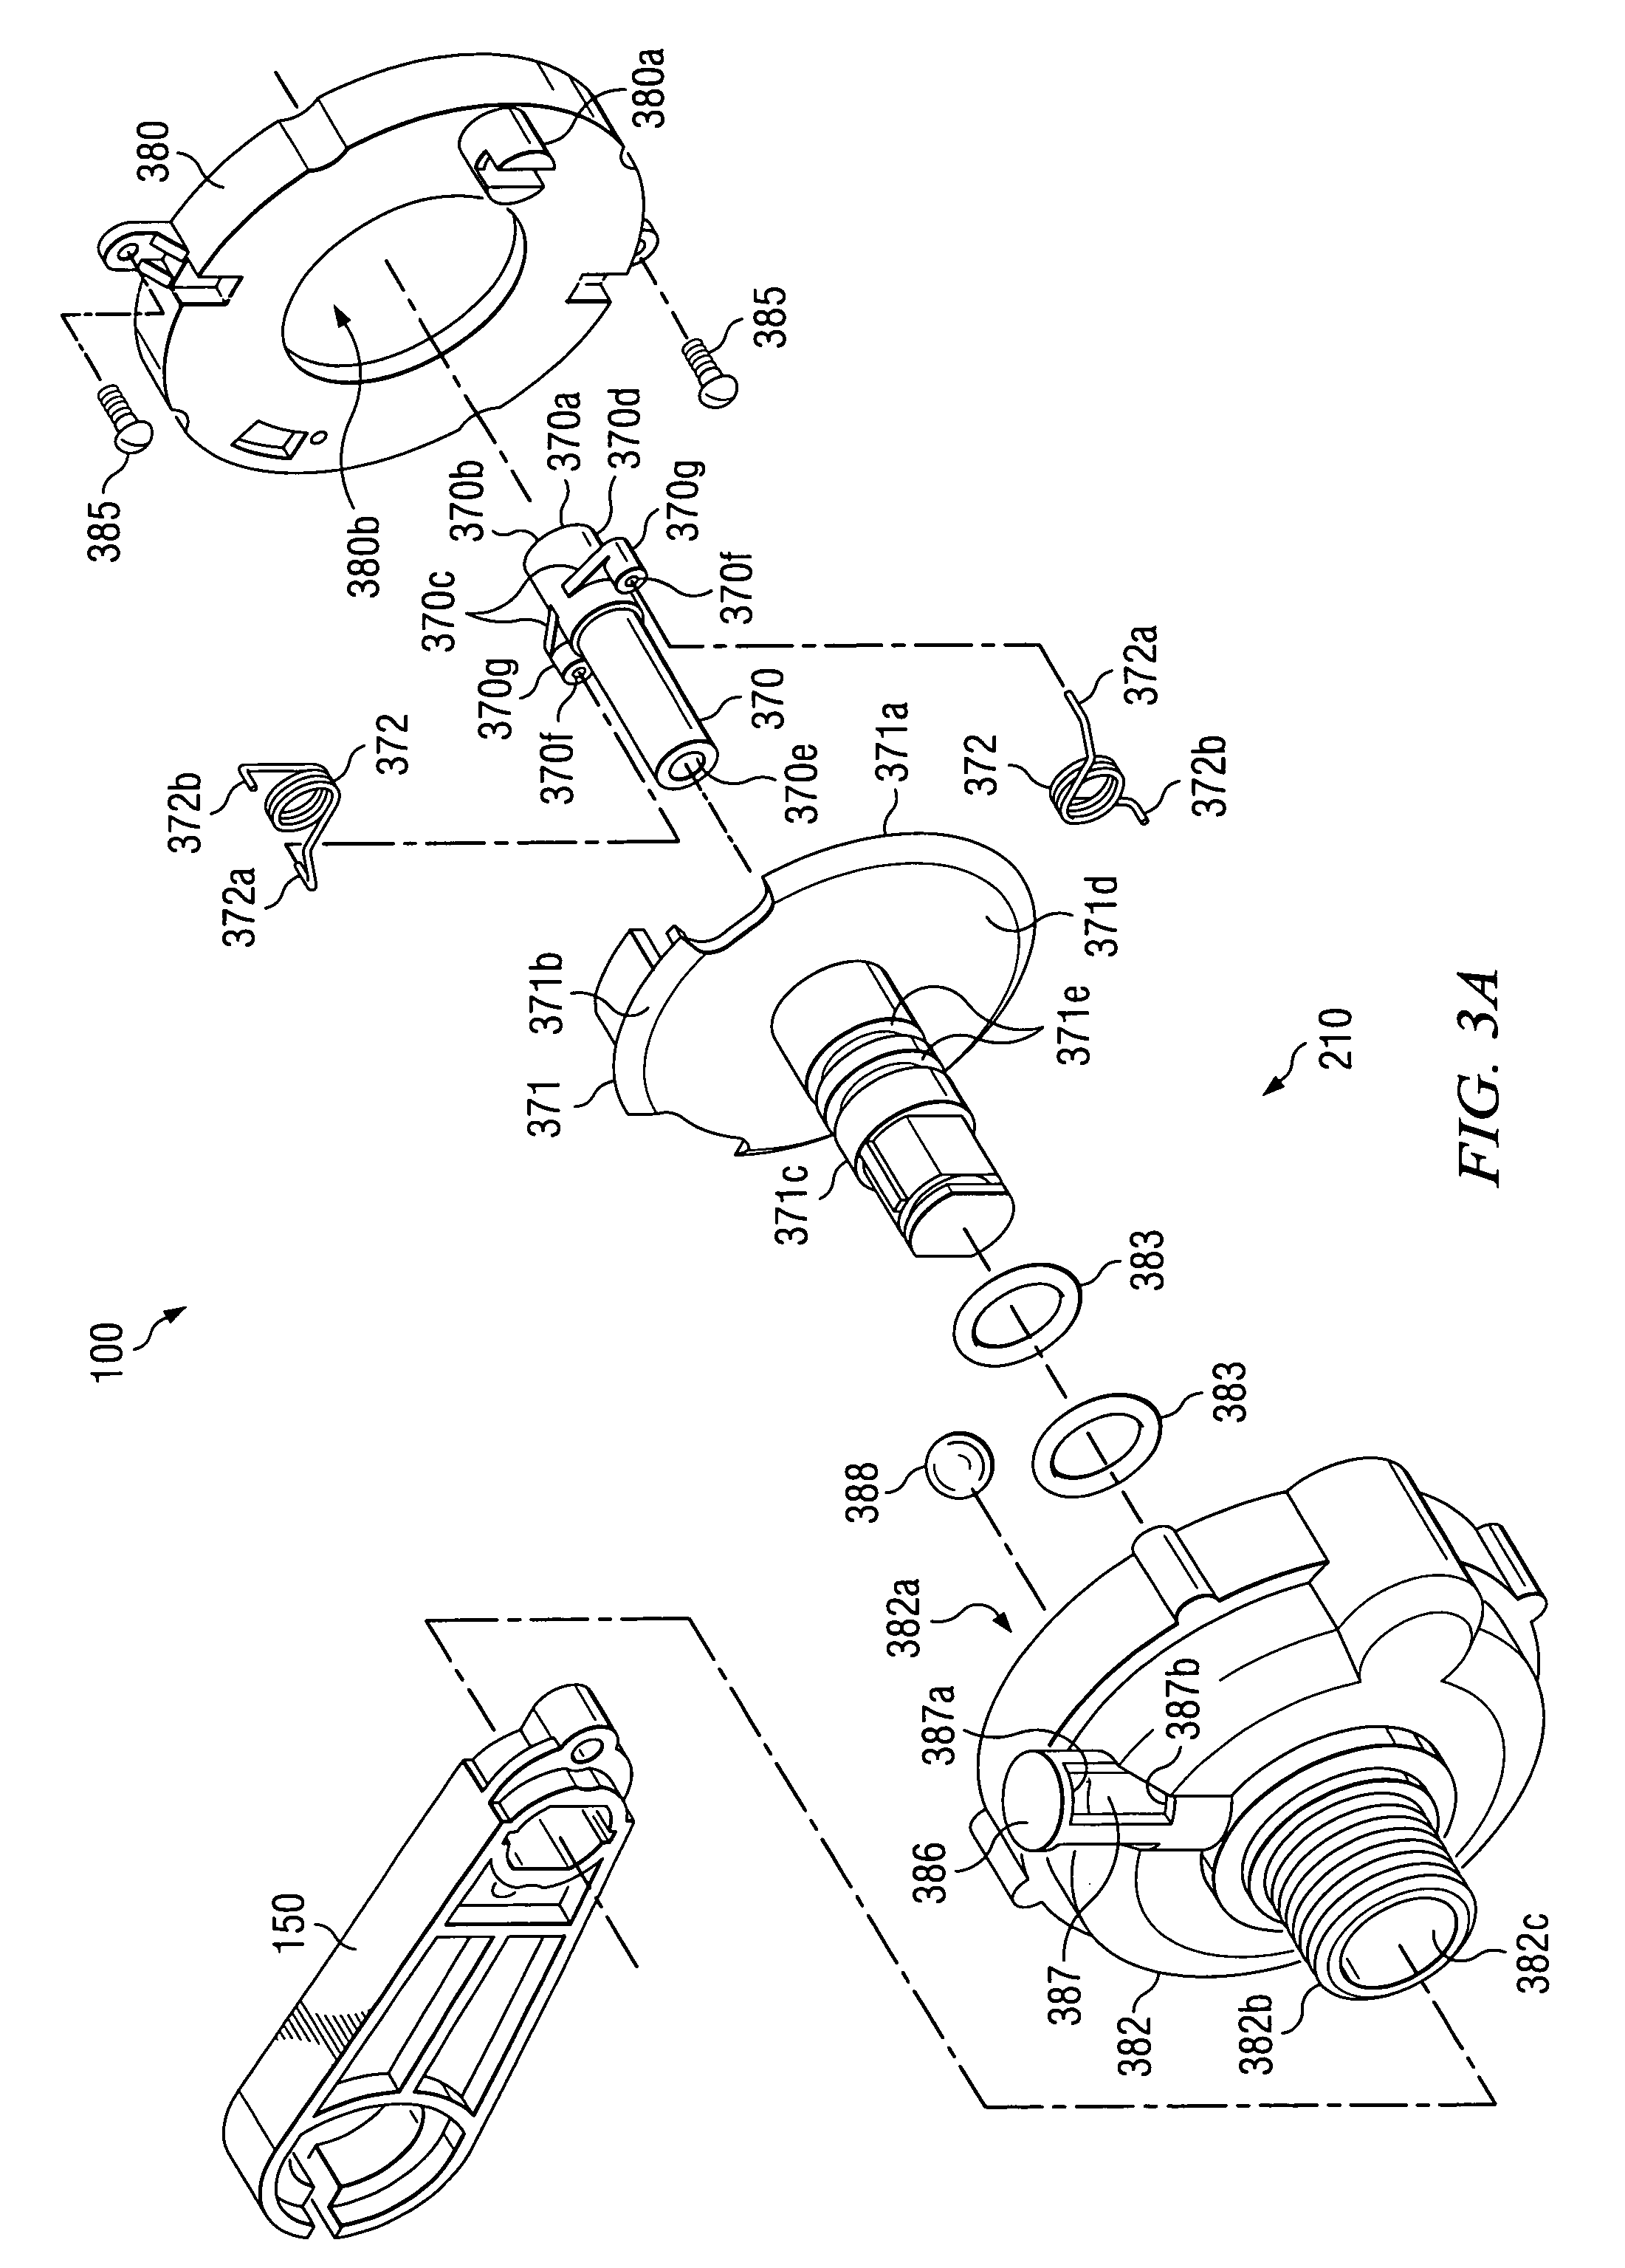 Indicator for a fault interrupter and load break switch